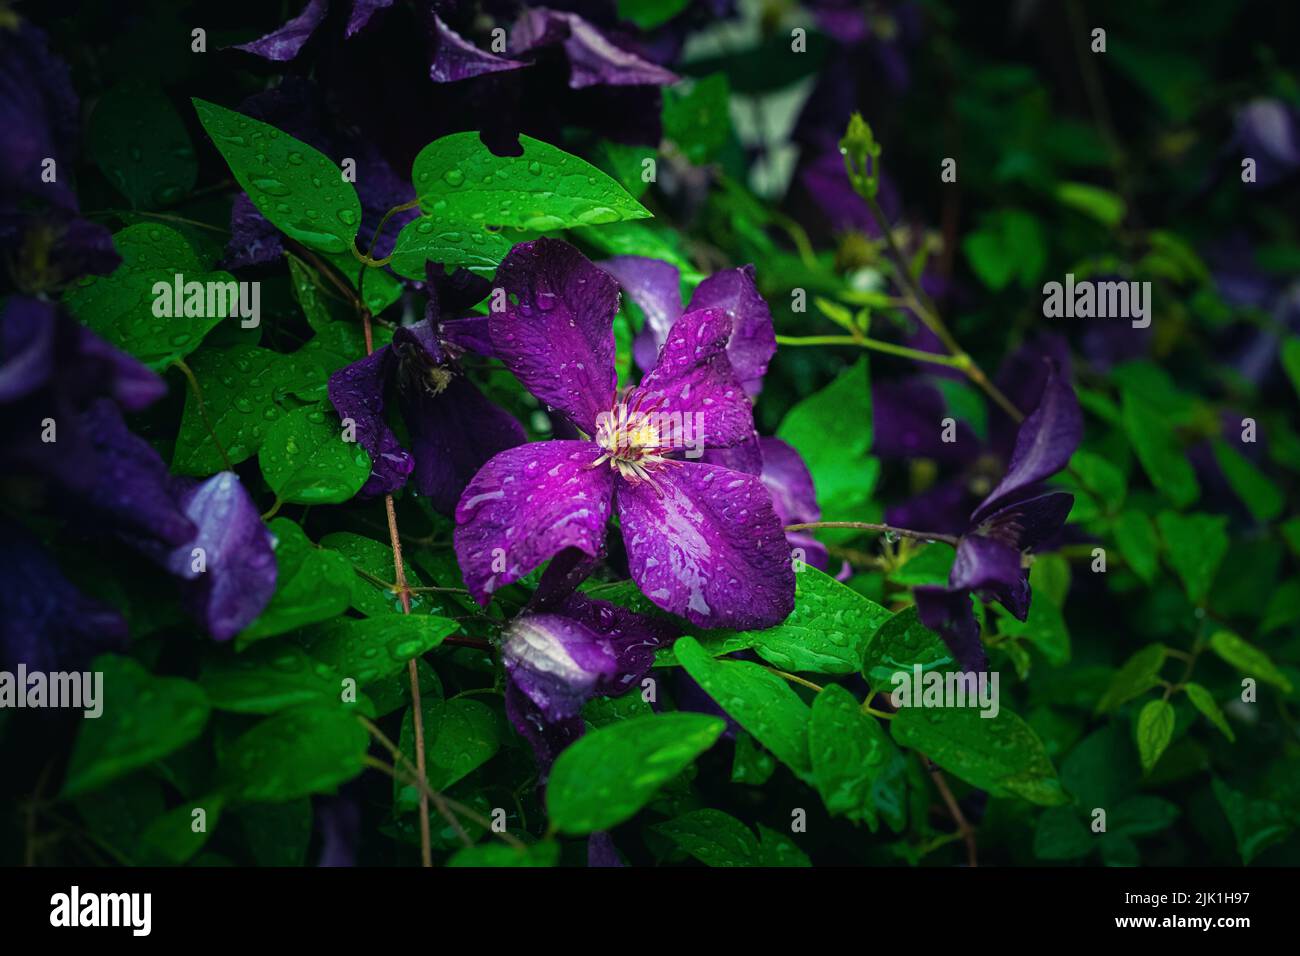 A closeup of a Clematis viticella or Italian leather flower with lush green leaves Stock Photo